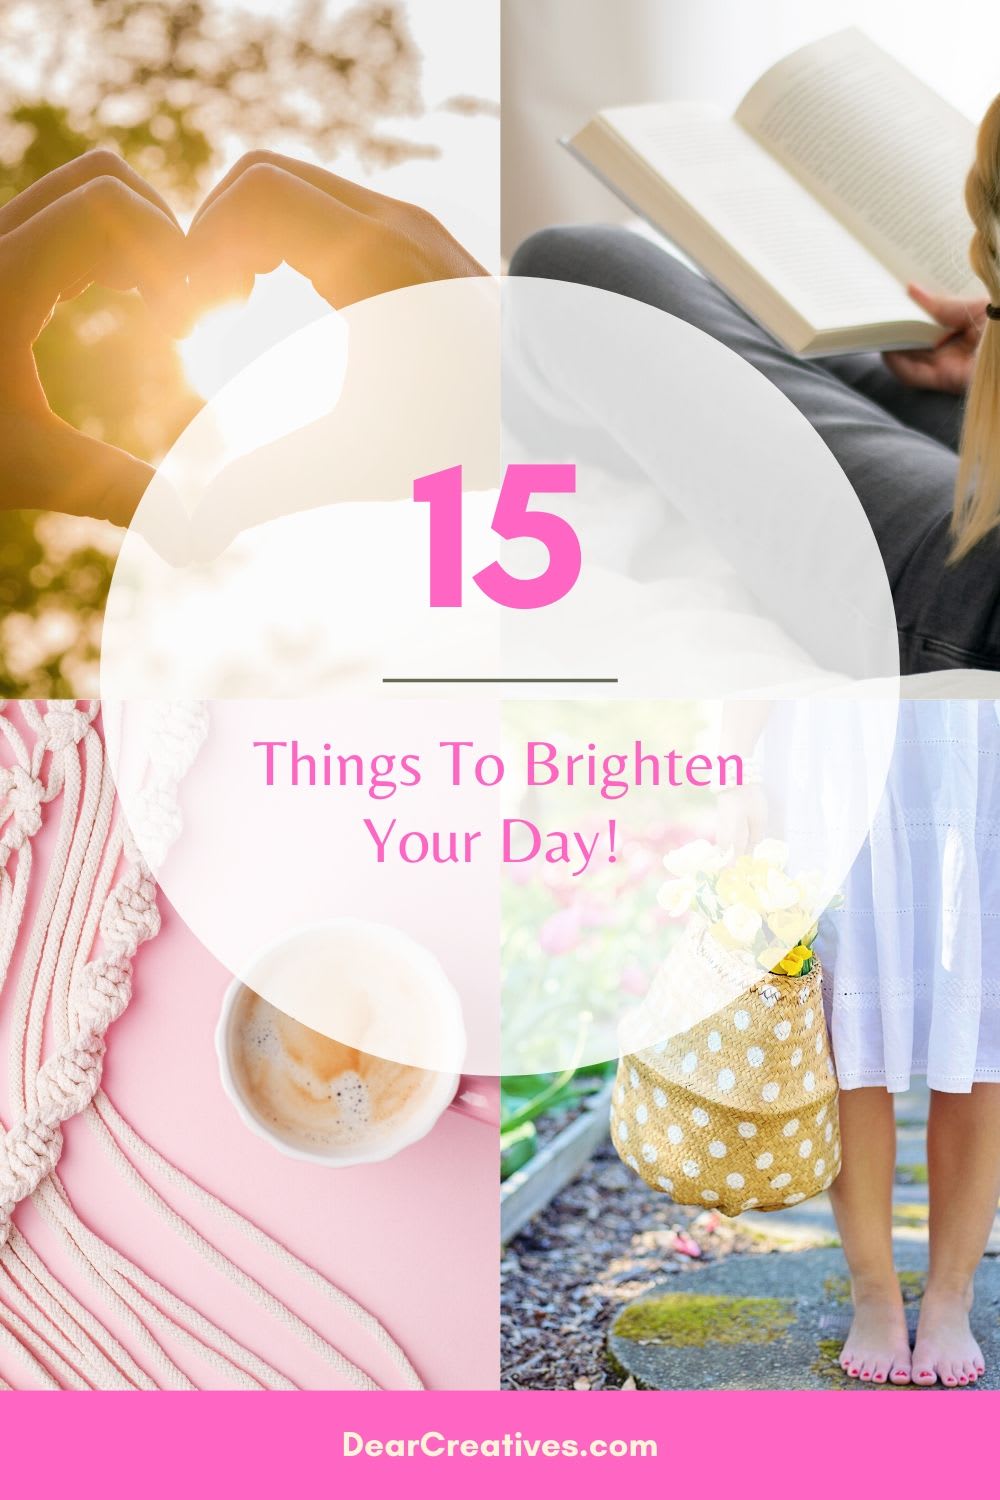 15+ Things To Brighten Your Day!